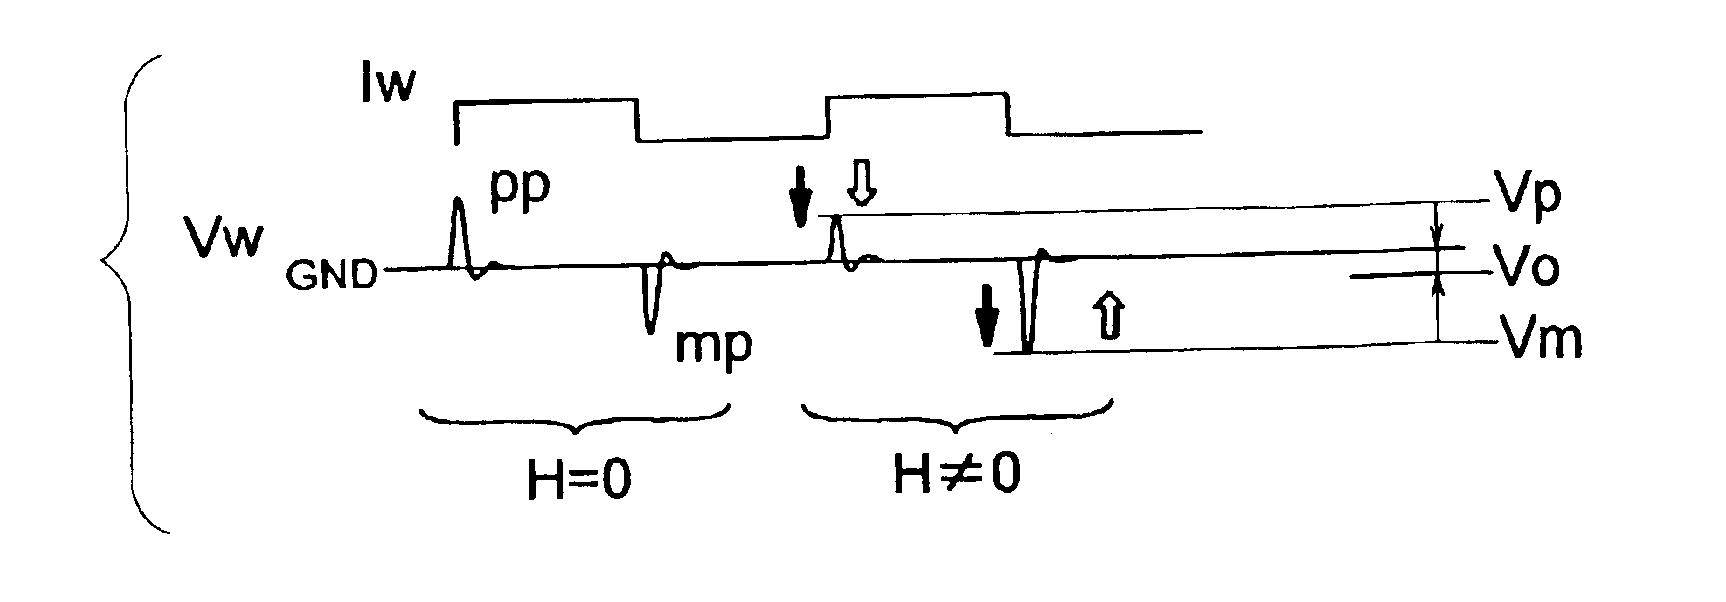 Magnetic field detection circuit using magnetic impedance device